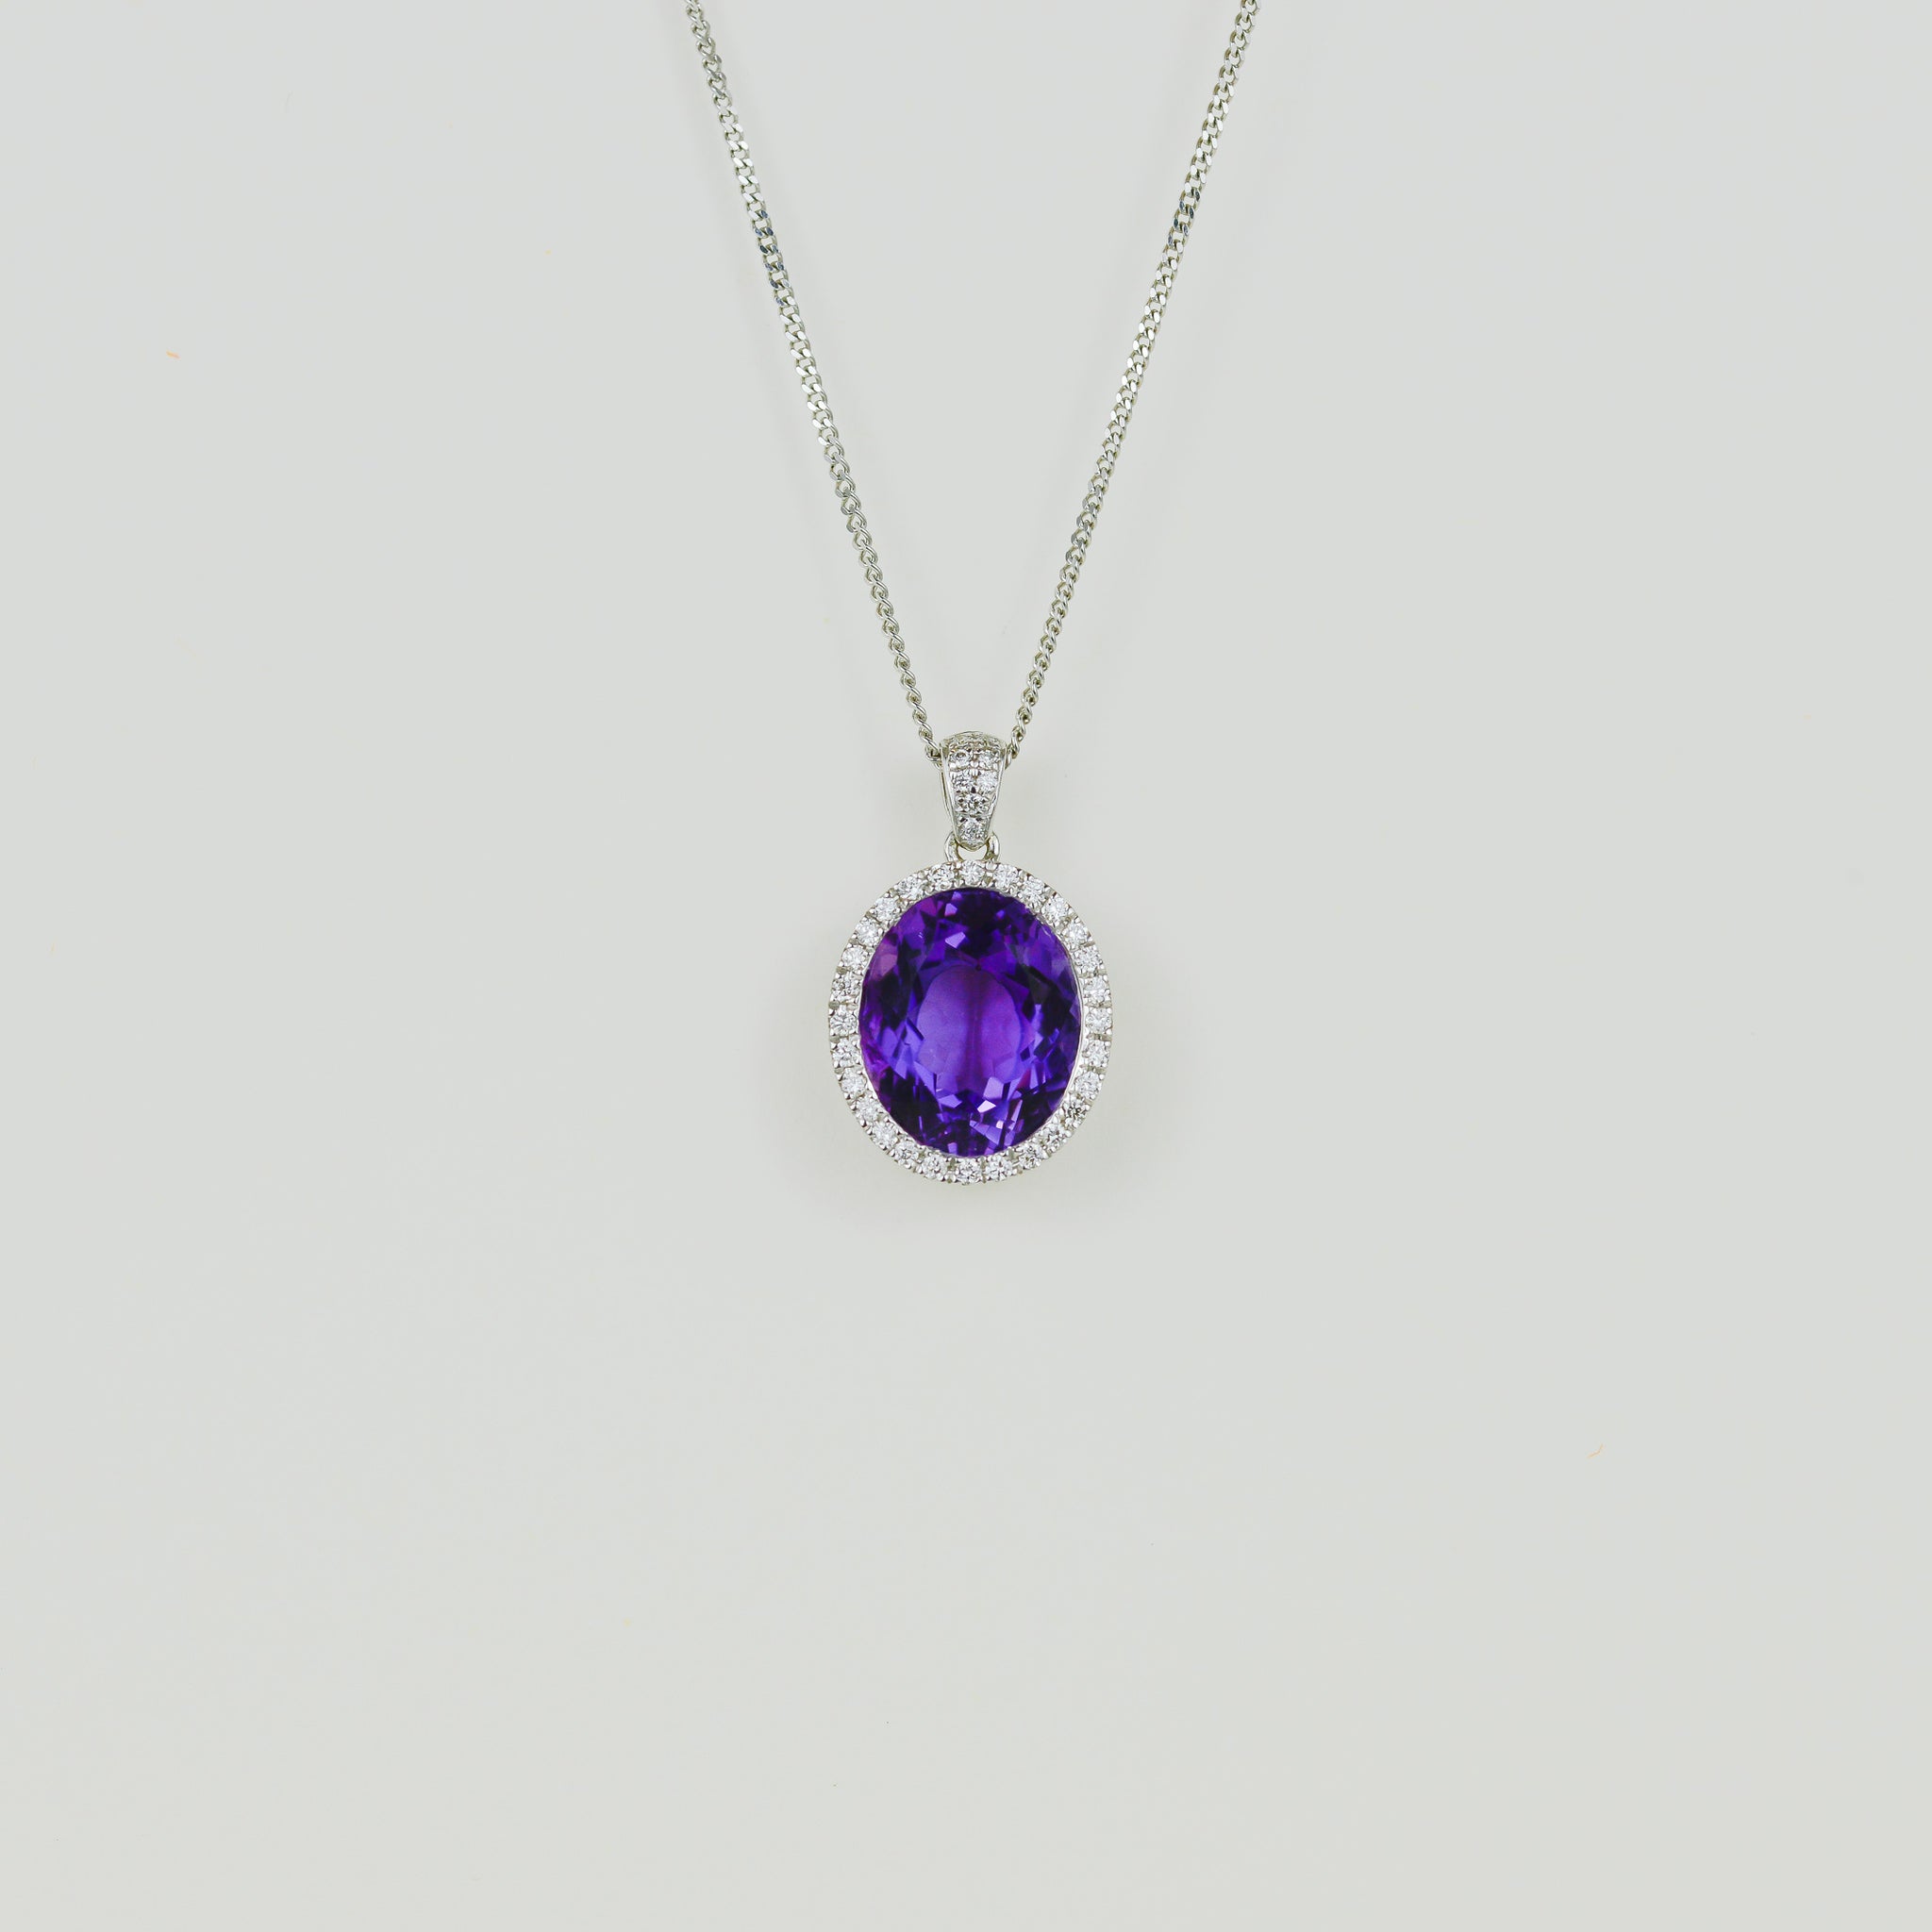 9ct White Gold 4.75ct Oval Amethyst and Diamond Pendant